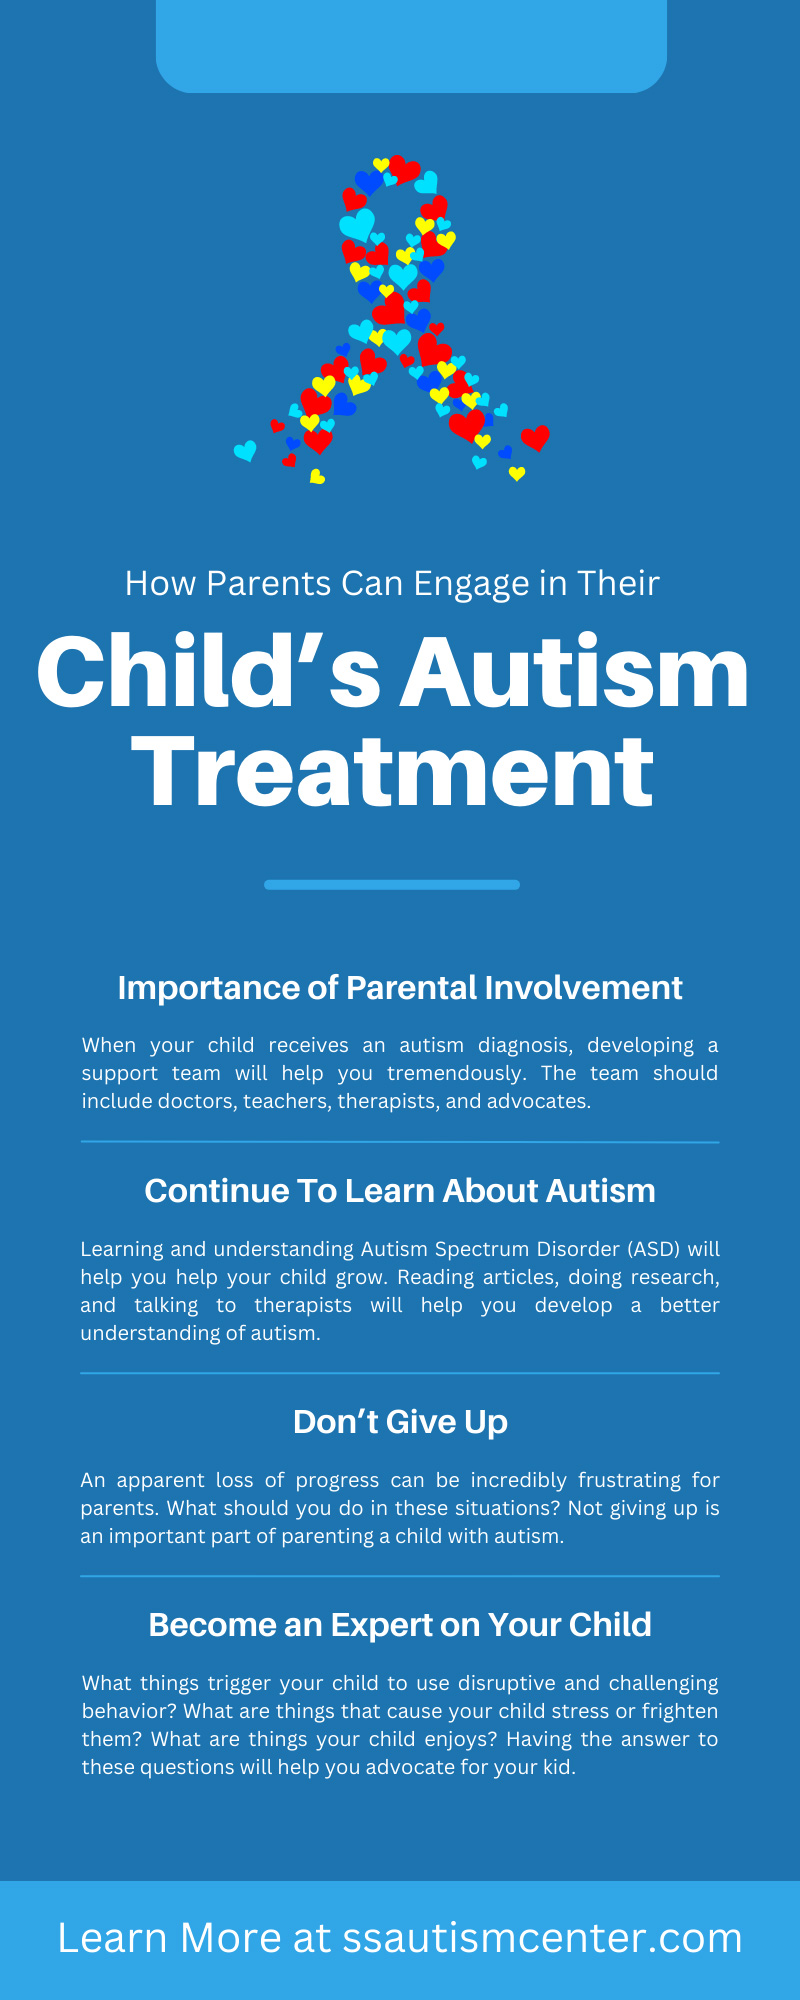 How Parents Can Engage in Their Child’s Autism Treatment